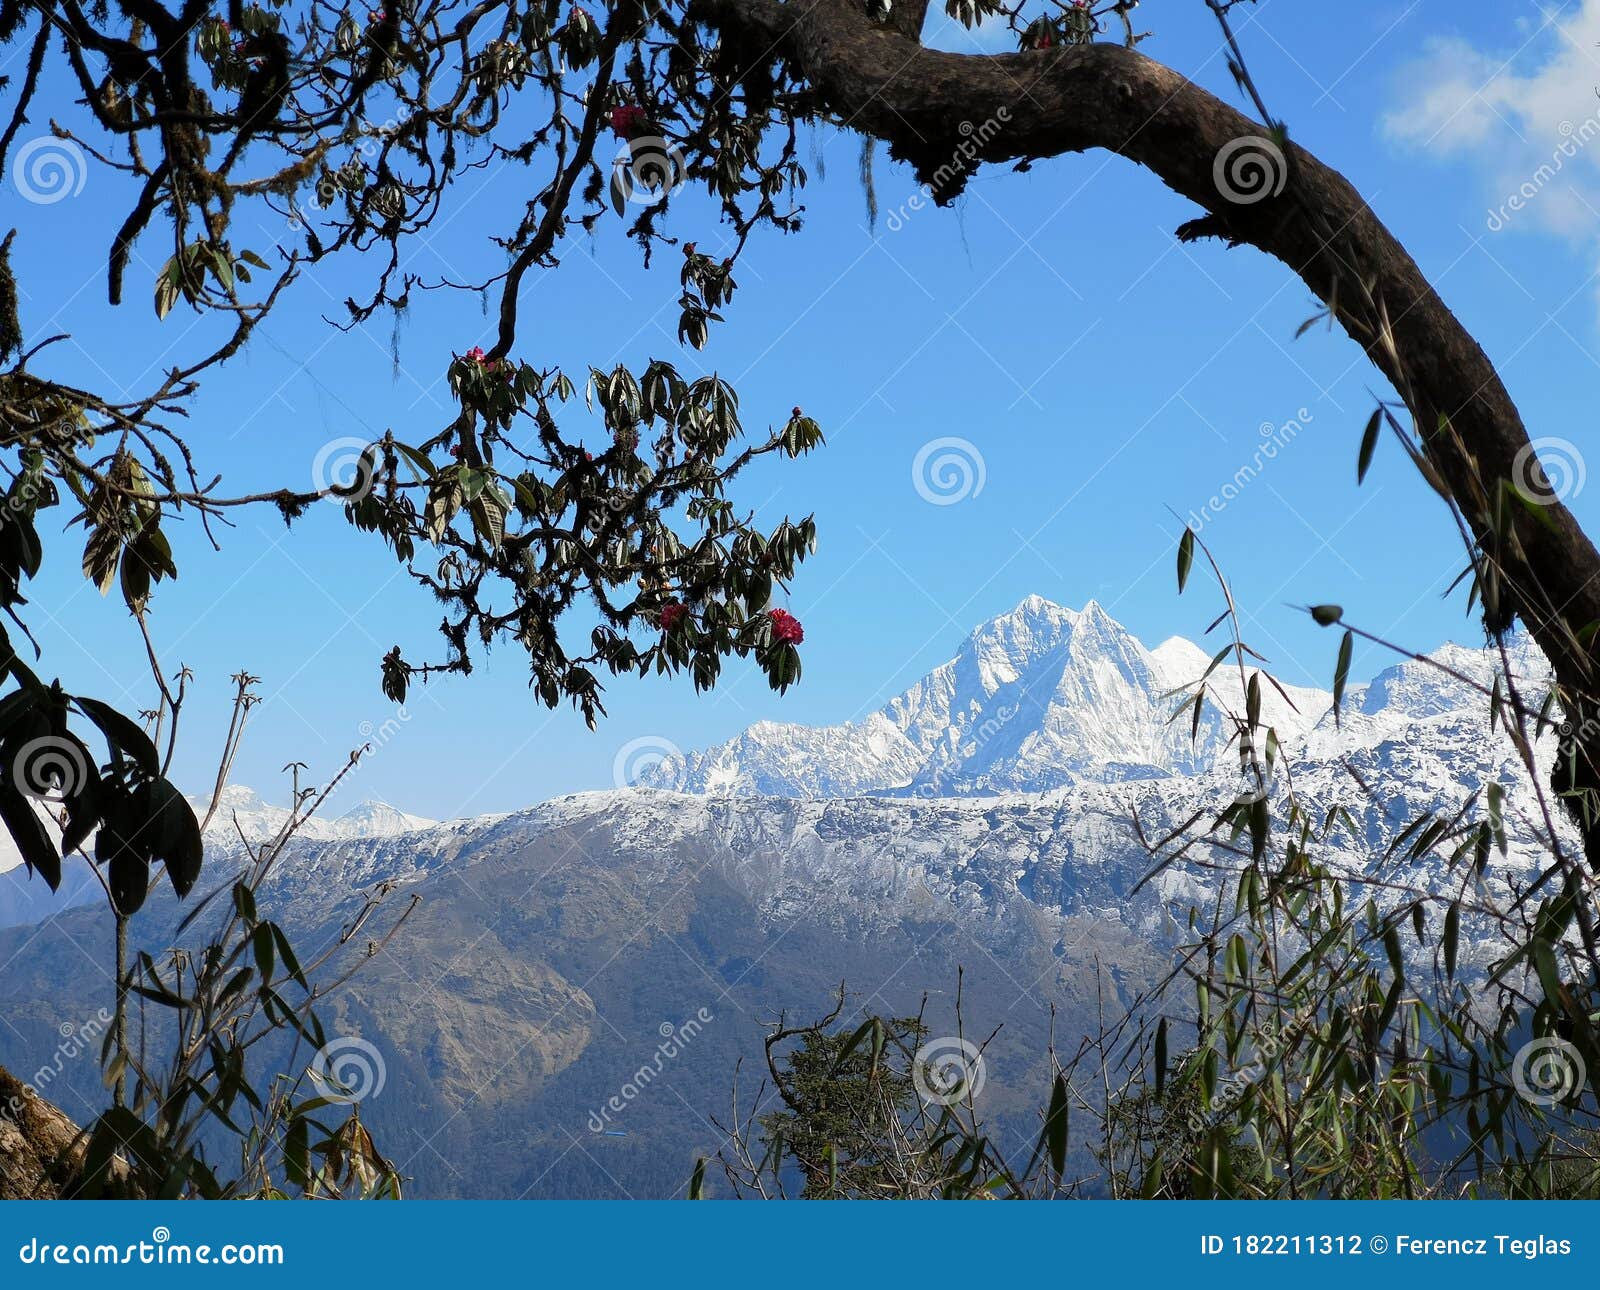 a beautiful picture of annapurna peaks, poon hill, nepal